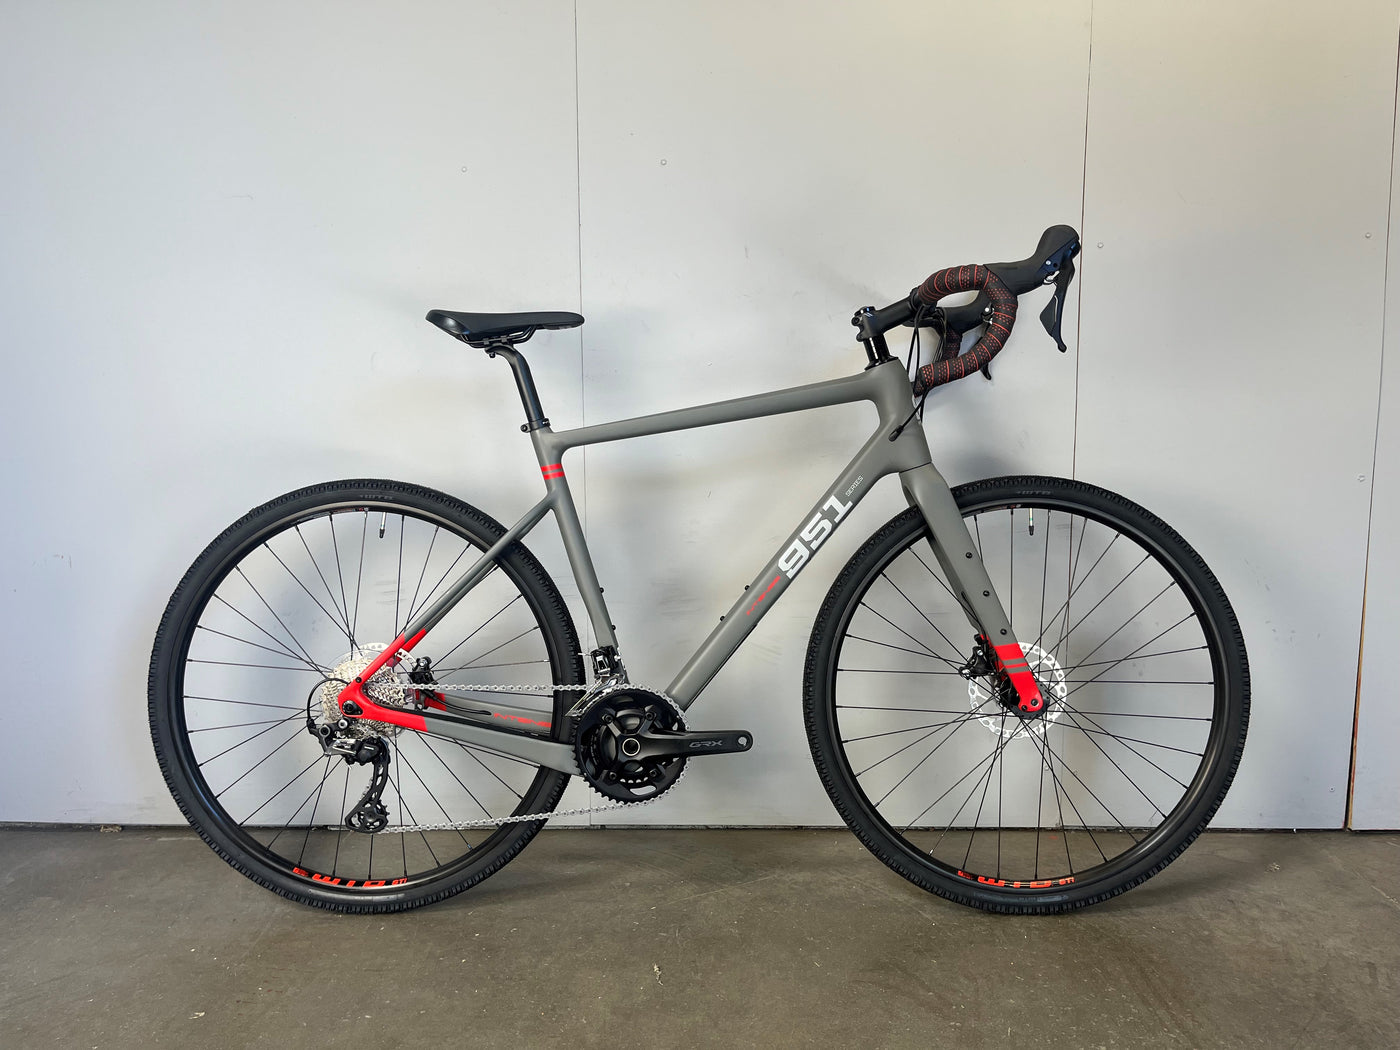 Shop online for discounted 951 Series Carbon Gravel bike for sale and save big